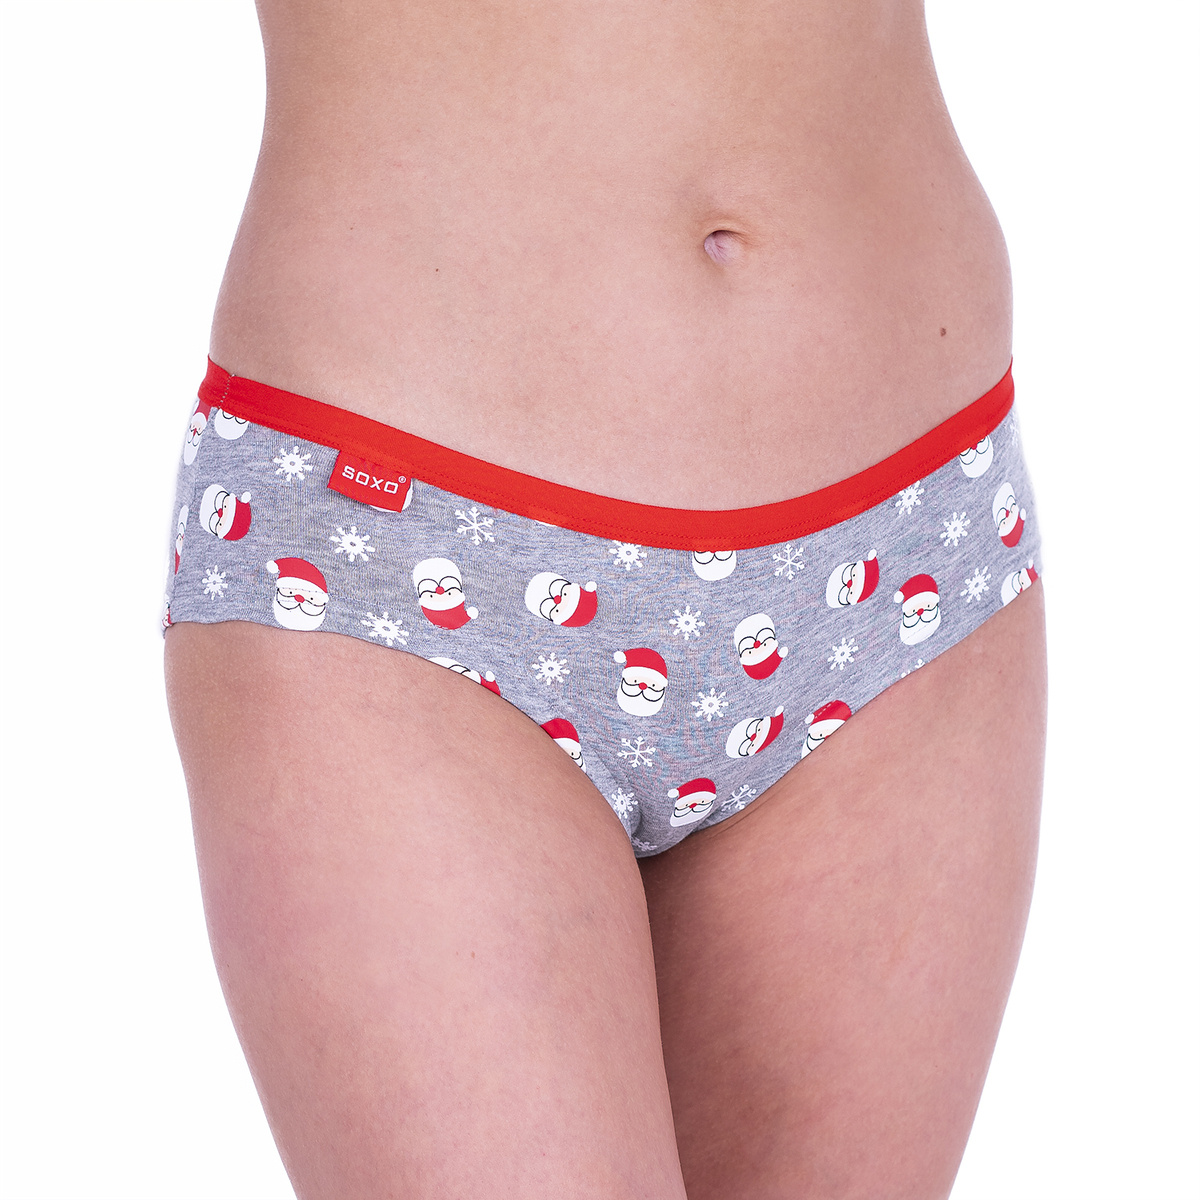 4x SOXO women's panties, a perfect Christmas gift for her